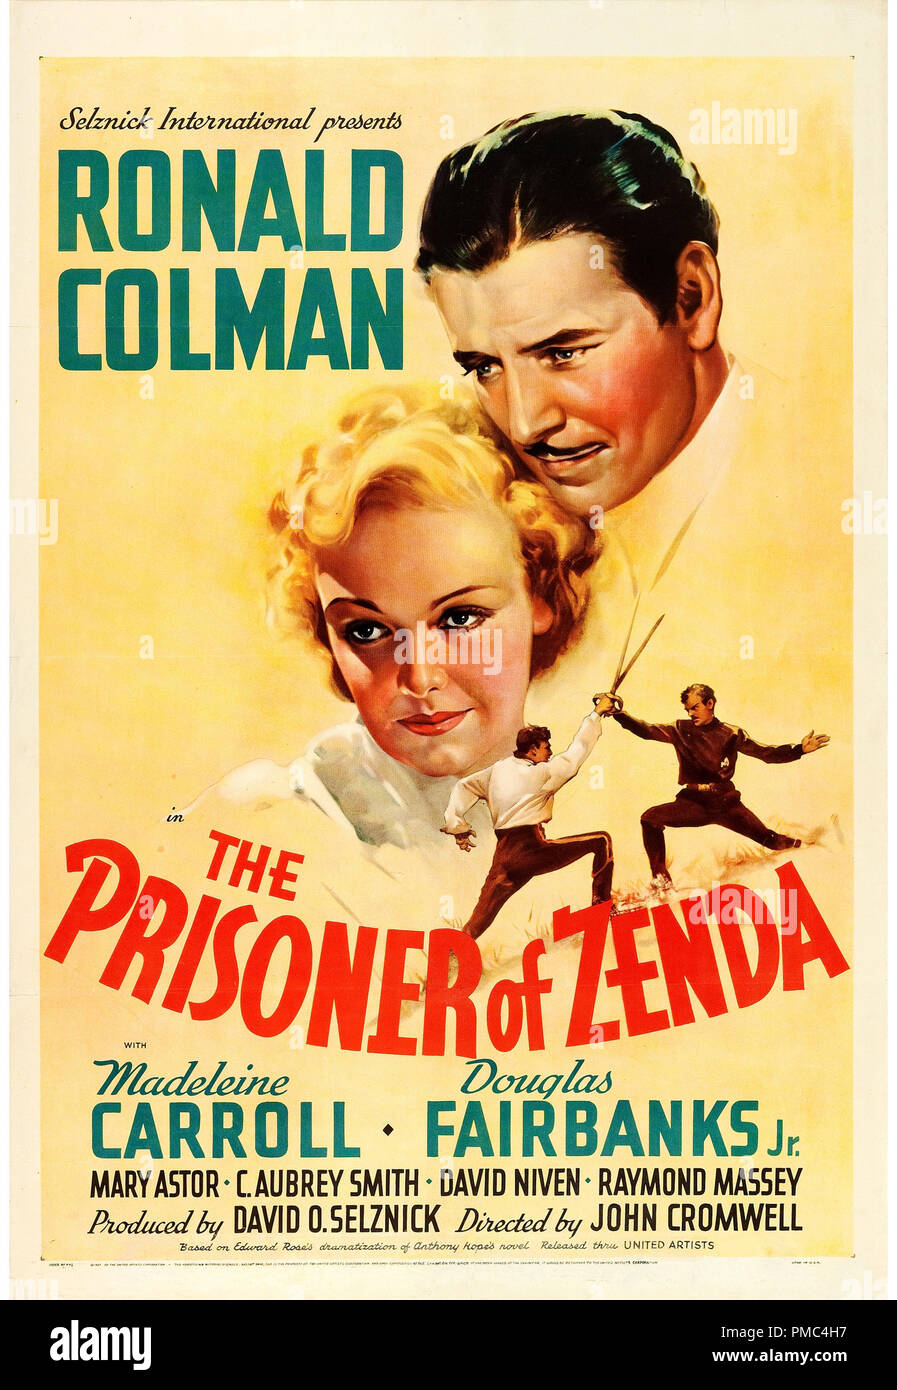 Ronald Colman,  The Prisoner of Zenda (United Artists, 1937). Poster  File Reference # 33595_780THA Stock Photo